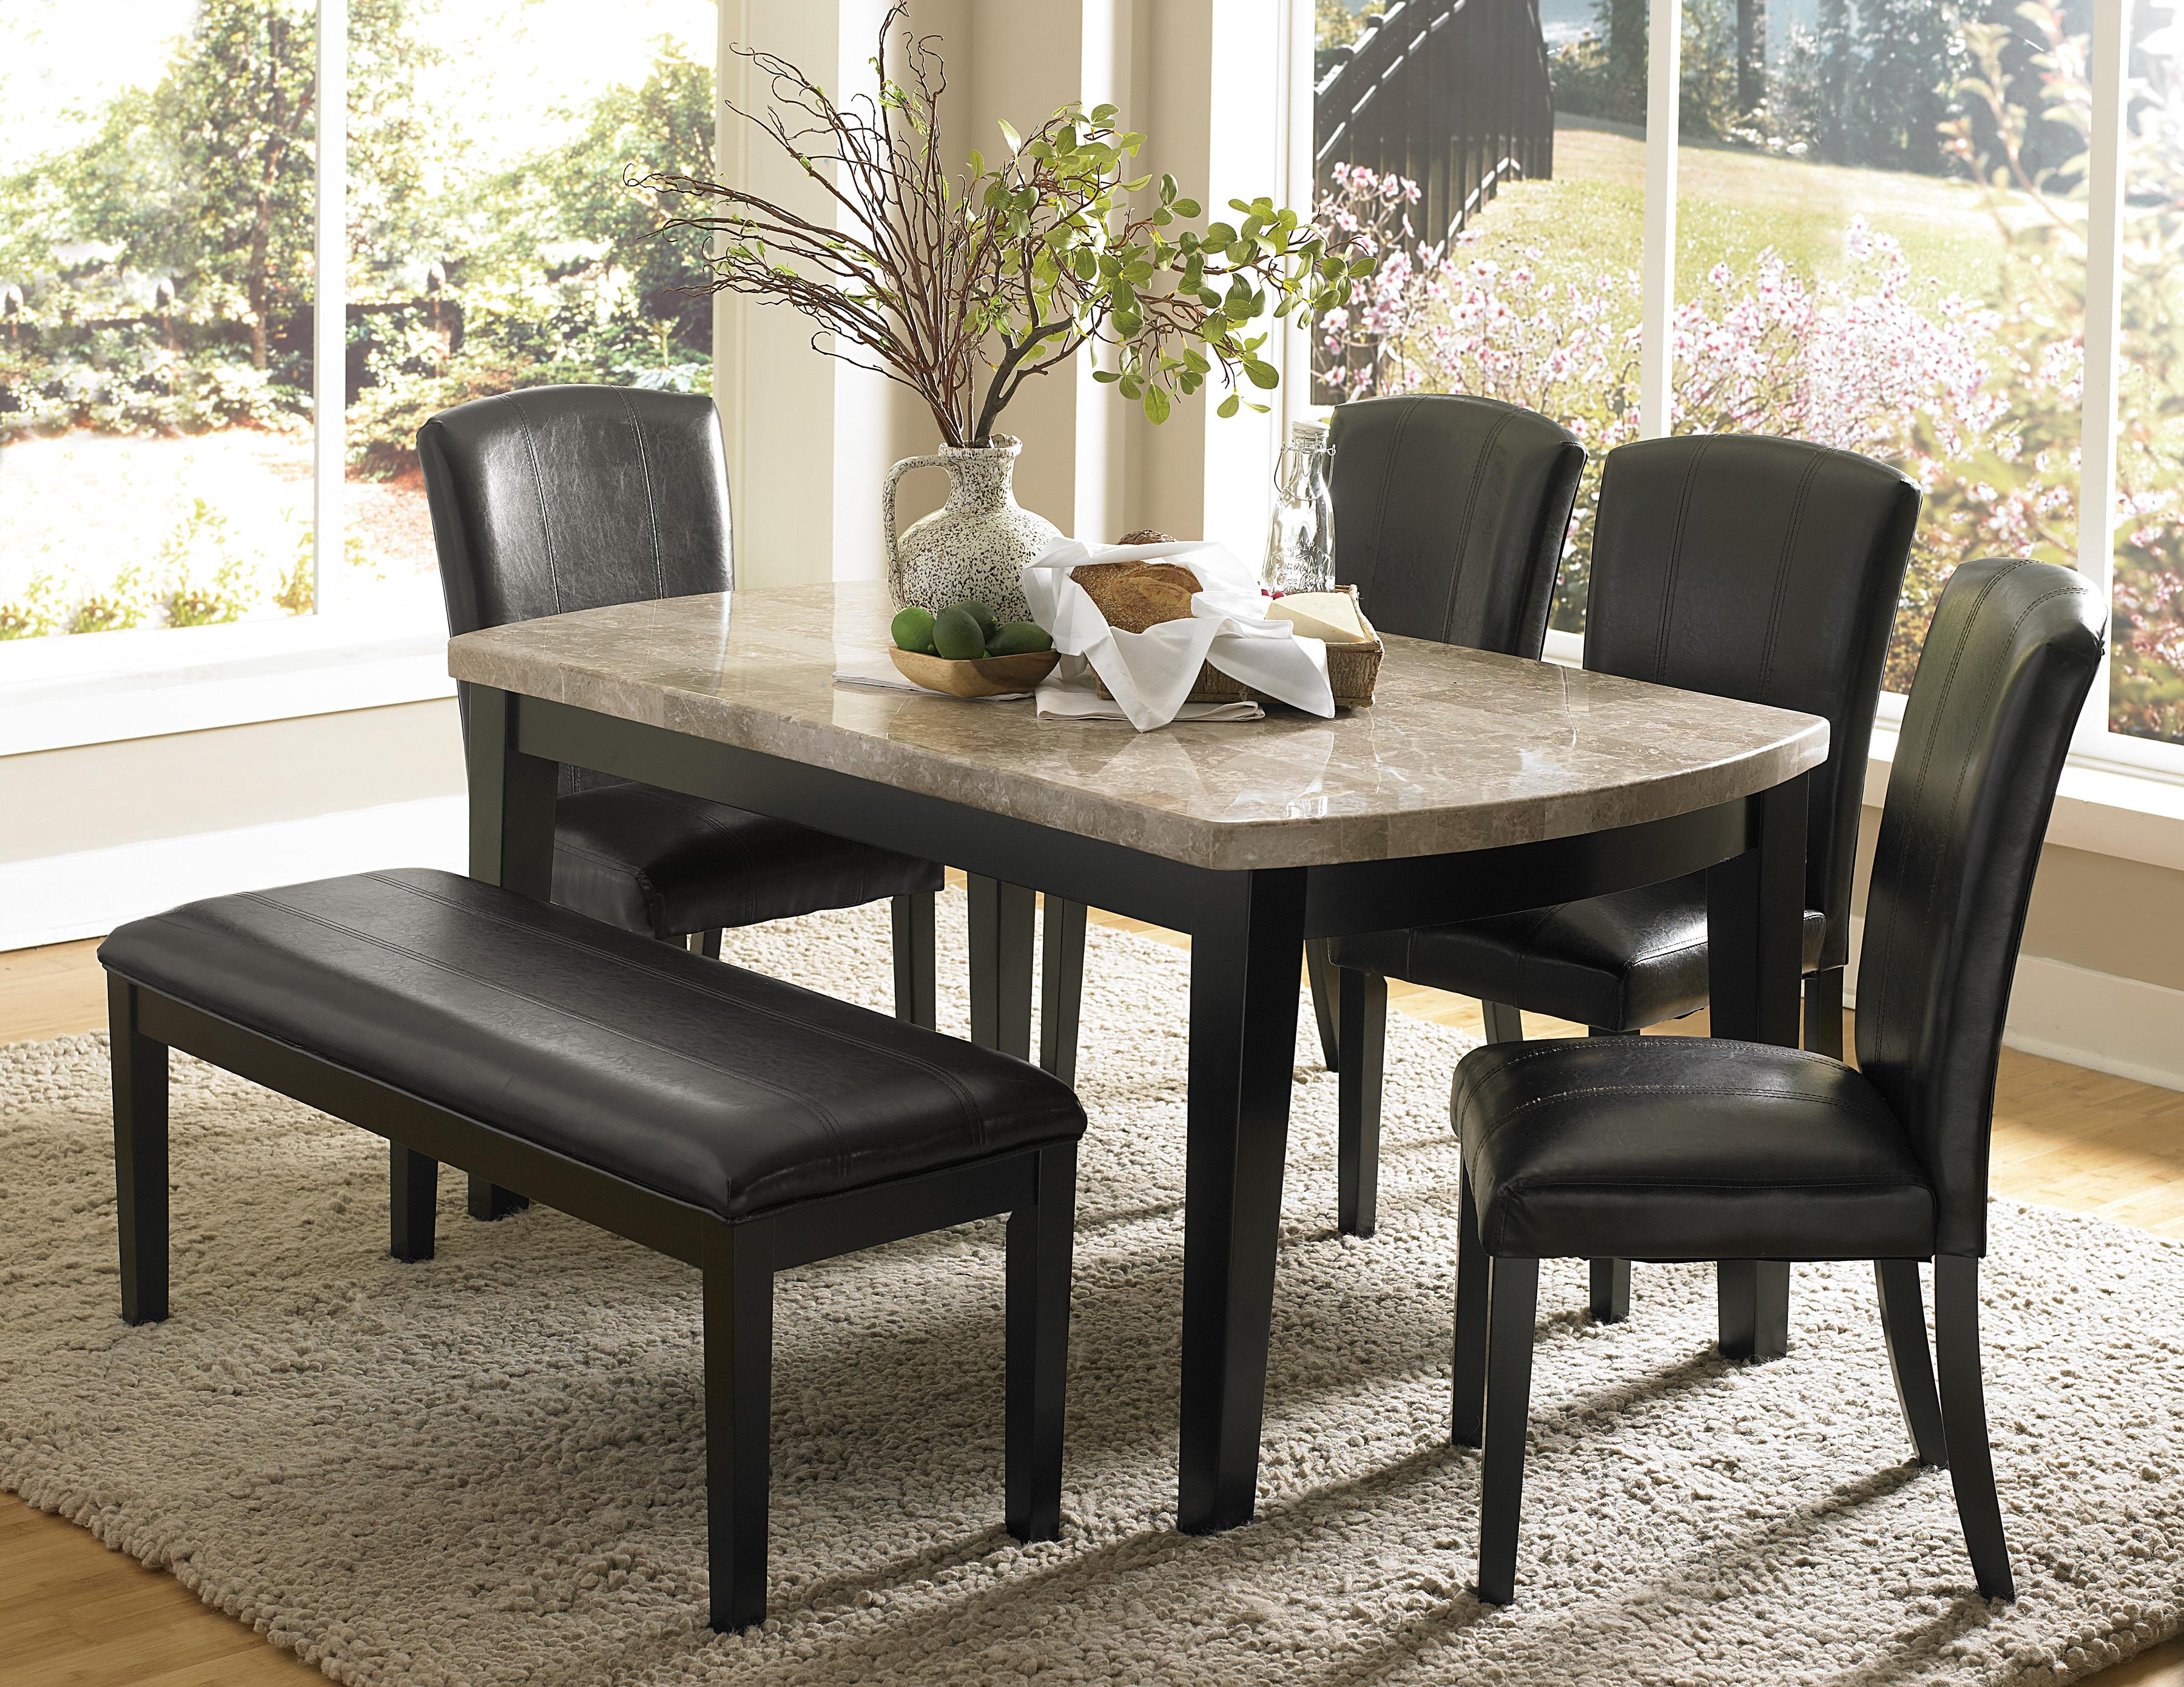 Transitional Dining Room Set 5070-64*6PC Cristo 5070-64*6PC in Espresso Faux Leather